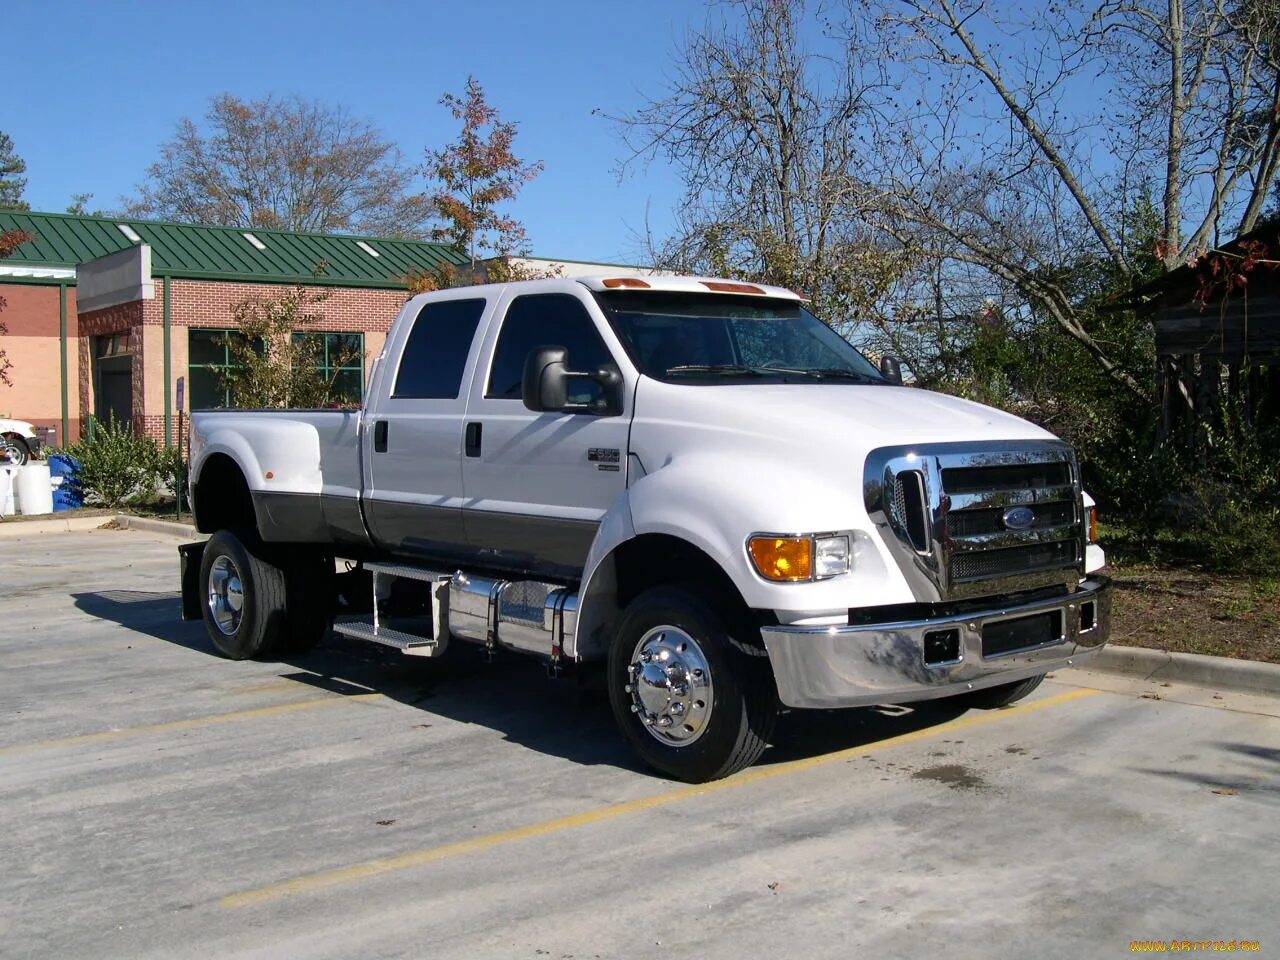 Ford f550. Форд ф 550. Ford f550 Truck. Ford f650.